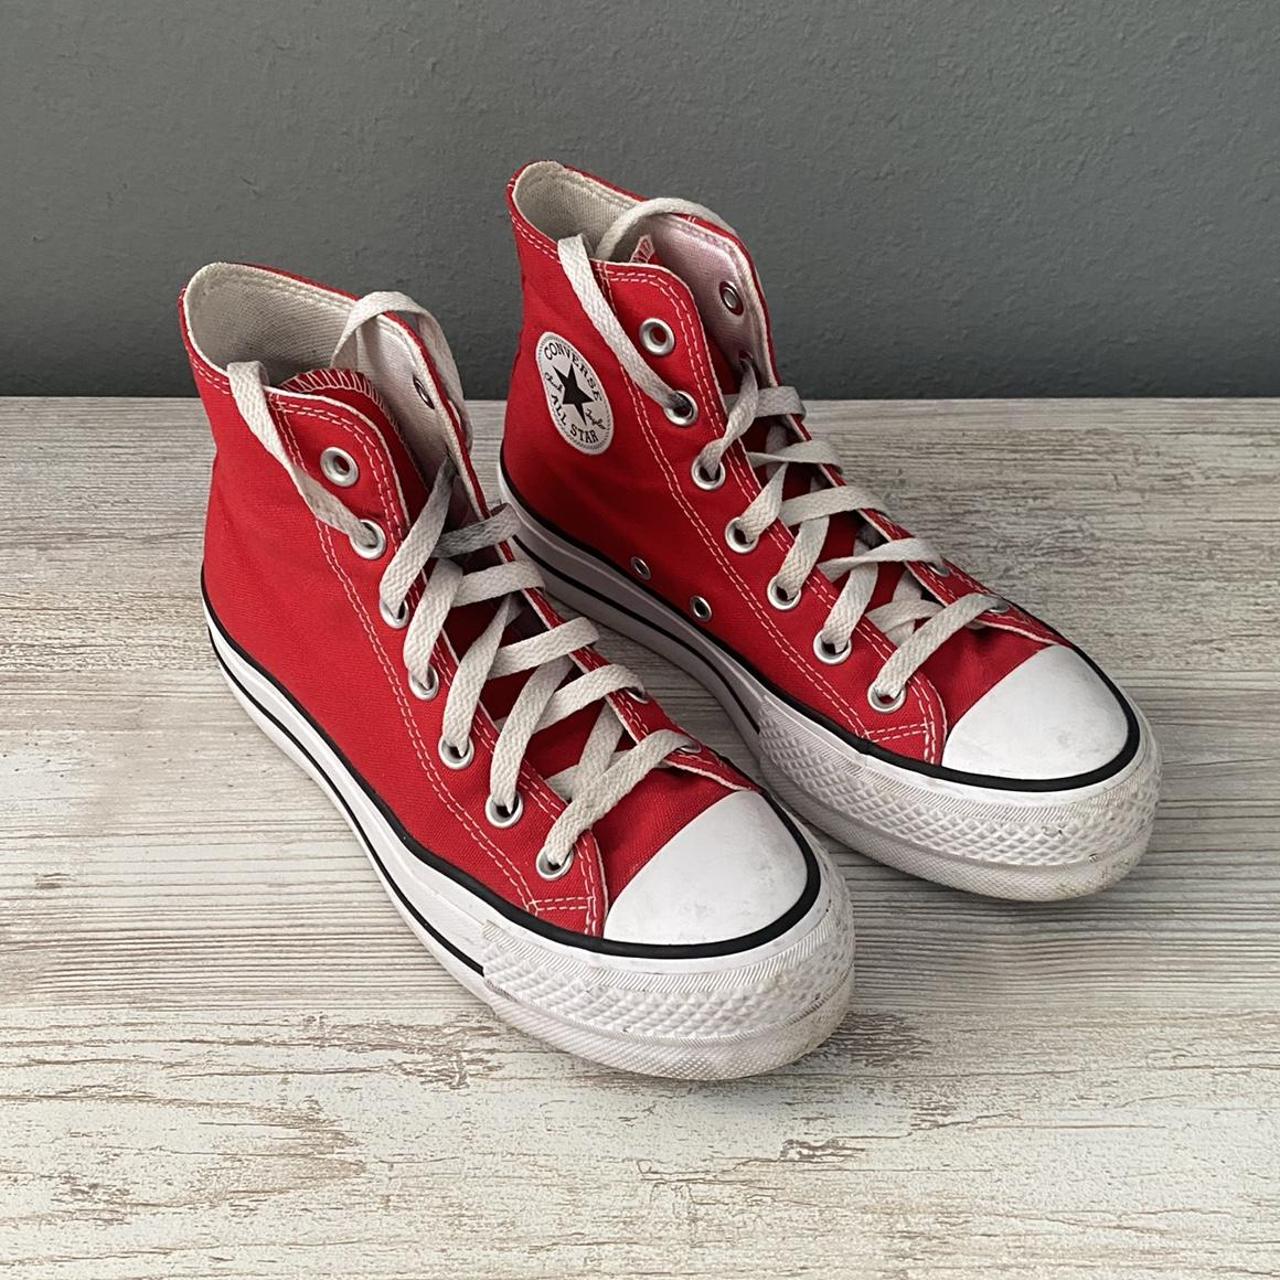 Converse Women's Red Trainers | Depop